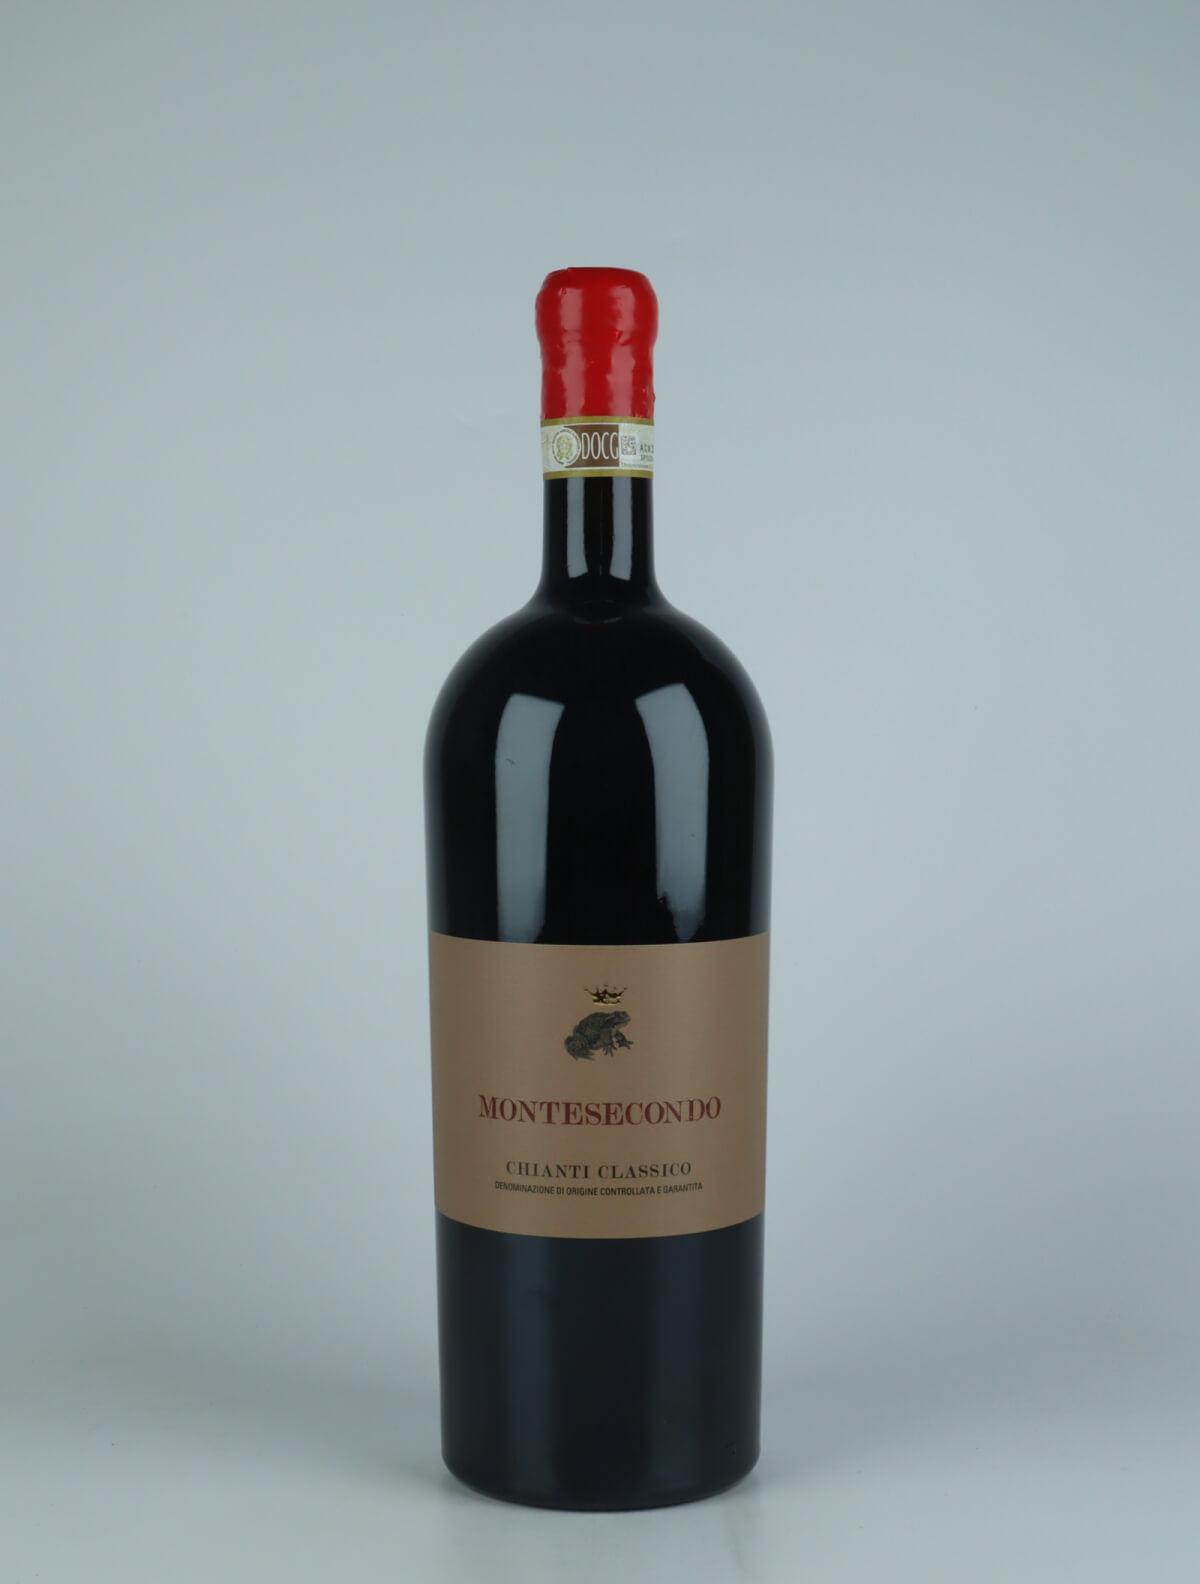 A bottle 2021 Chianti Classico Red wine from Montesecondo, Tuscany in Italy